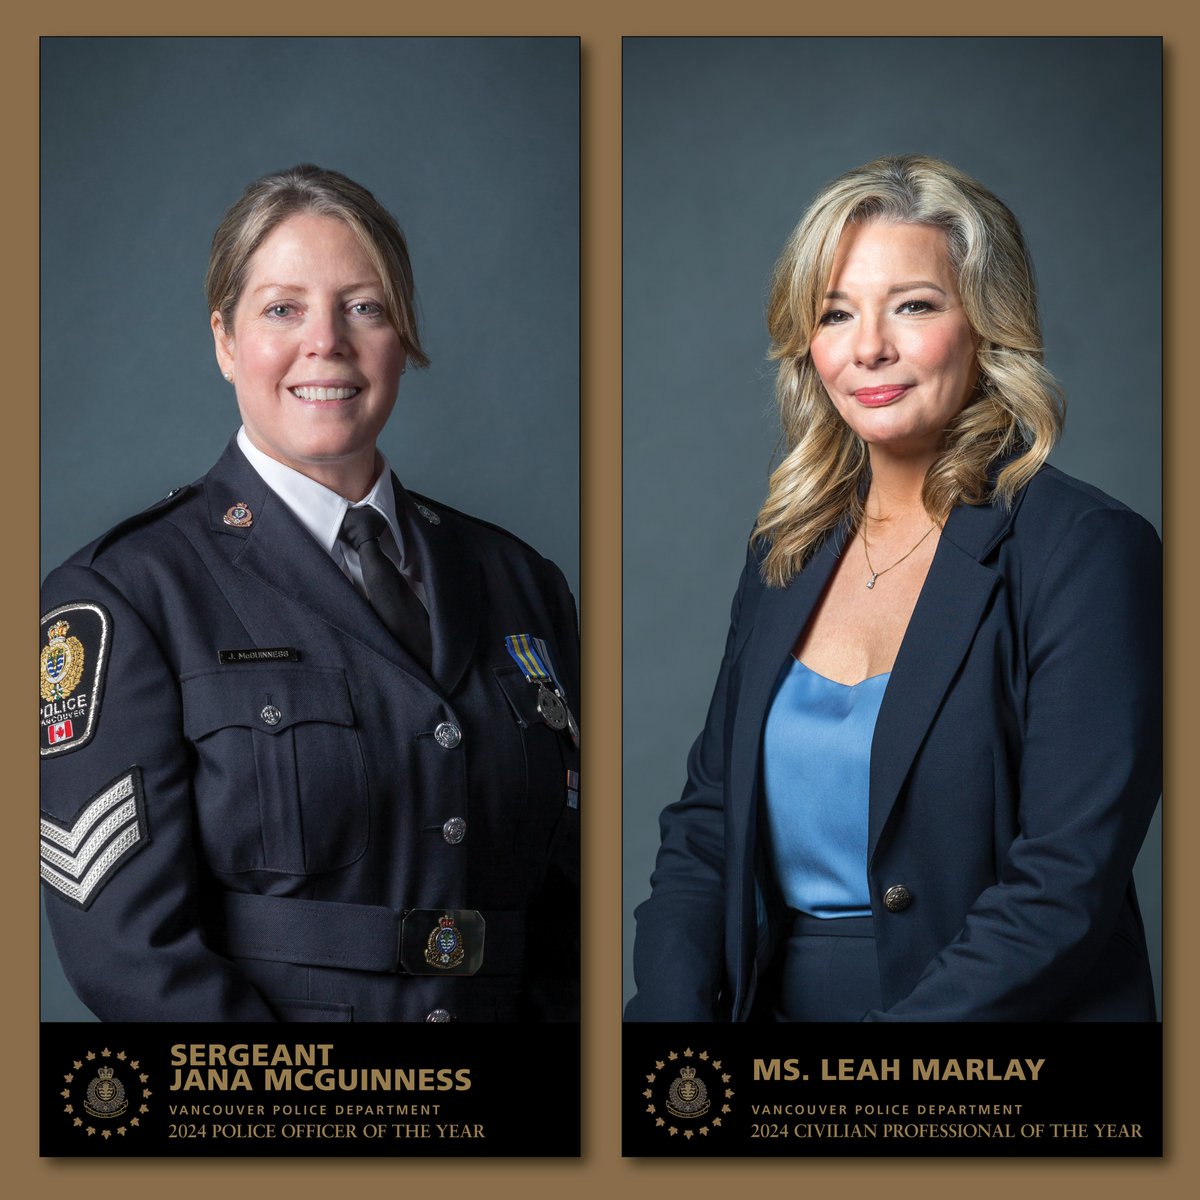 Huge congratulations to our 2024 #VPD 'Police Officer of the Year' - Patrol Sgt. Jana McGuinness & our 'Civilian Professional of the Year' - Ms. Leah Marlay (Block Watch) for your #OutstandingService to the community & @VancouverPD! #VancouversFinest